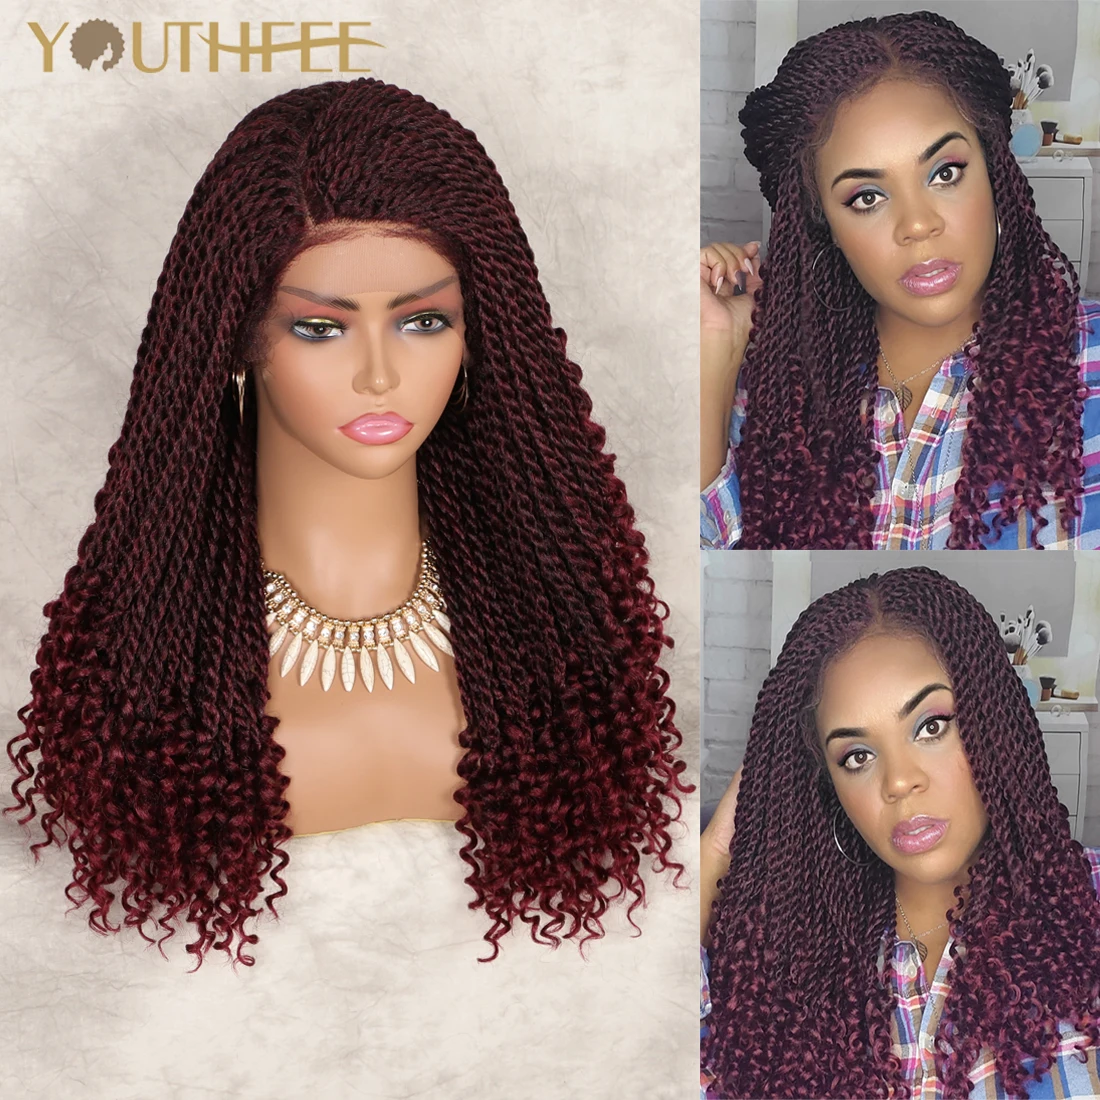 Youthfee Braided Wigs Lace Front Synthetic Wig With Baby Hair 20" Twist Braid Wigs With Curls For Women Lace Frontal Braid Wig